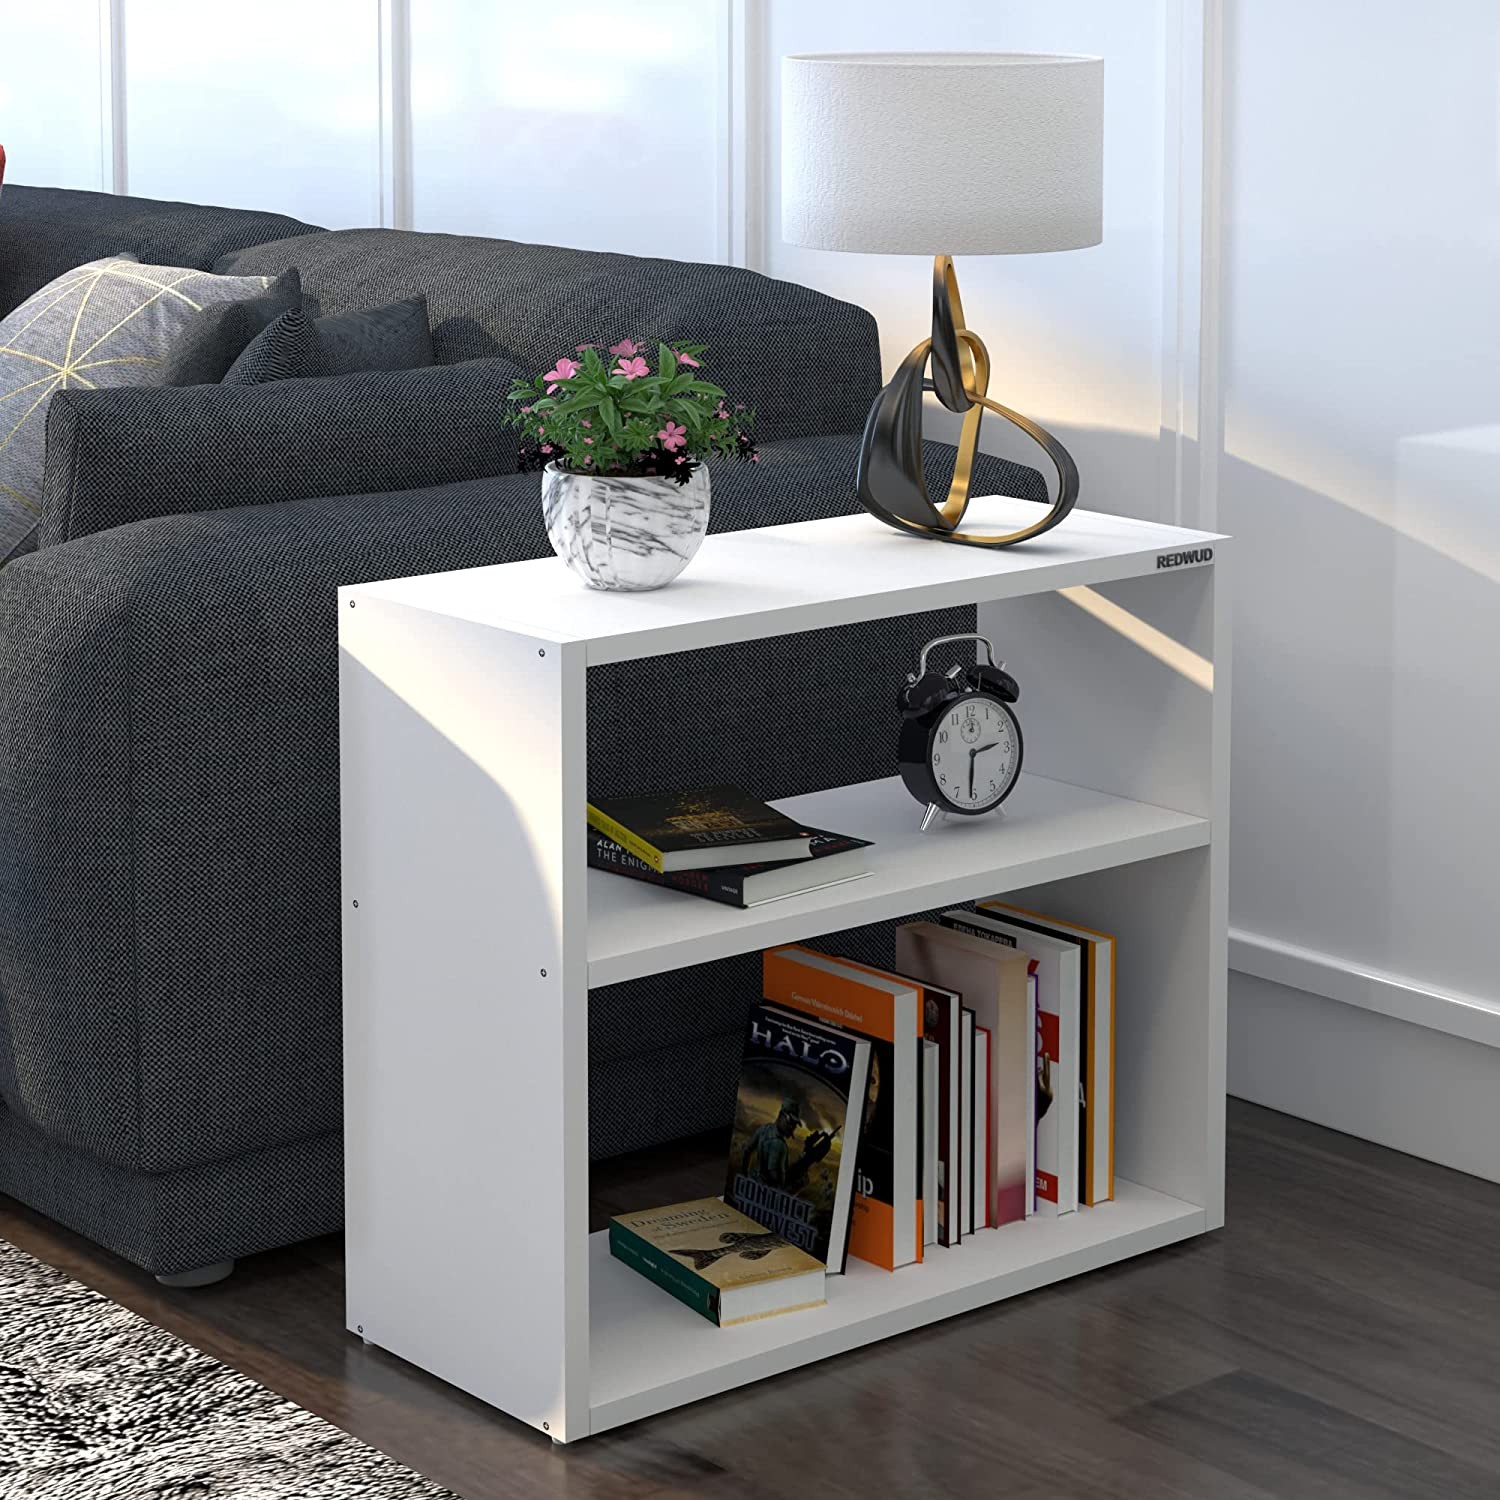 patricia-engineered-wood-bedside-table-end-table-white-rd-patricia-wt